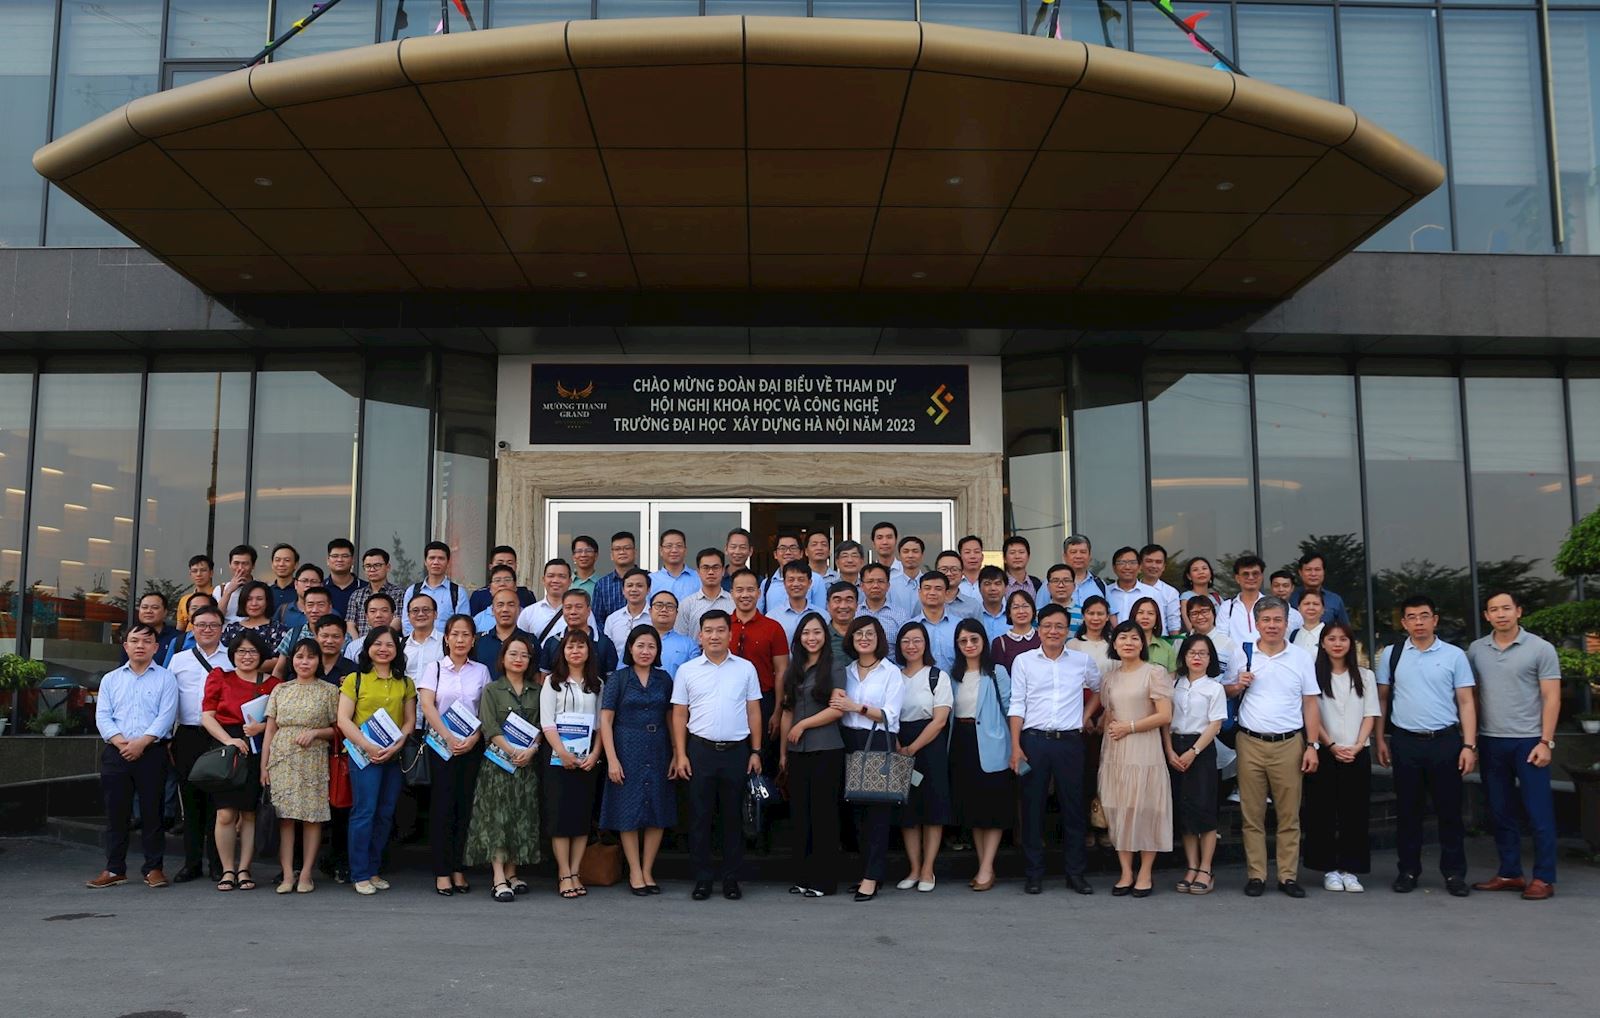 SCIENCE AND TECHNOLOGY CONFERENCE 2023 - HANOI UNIVERSITY OF CIVIL ENGINEERING